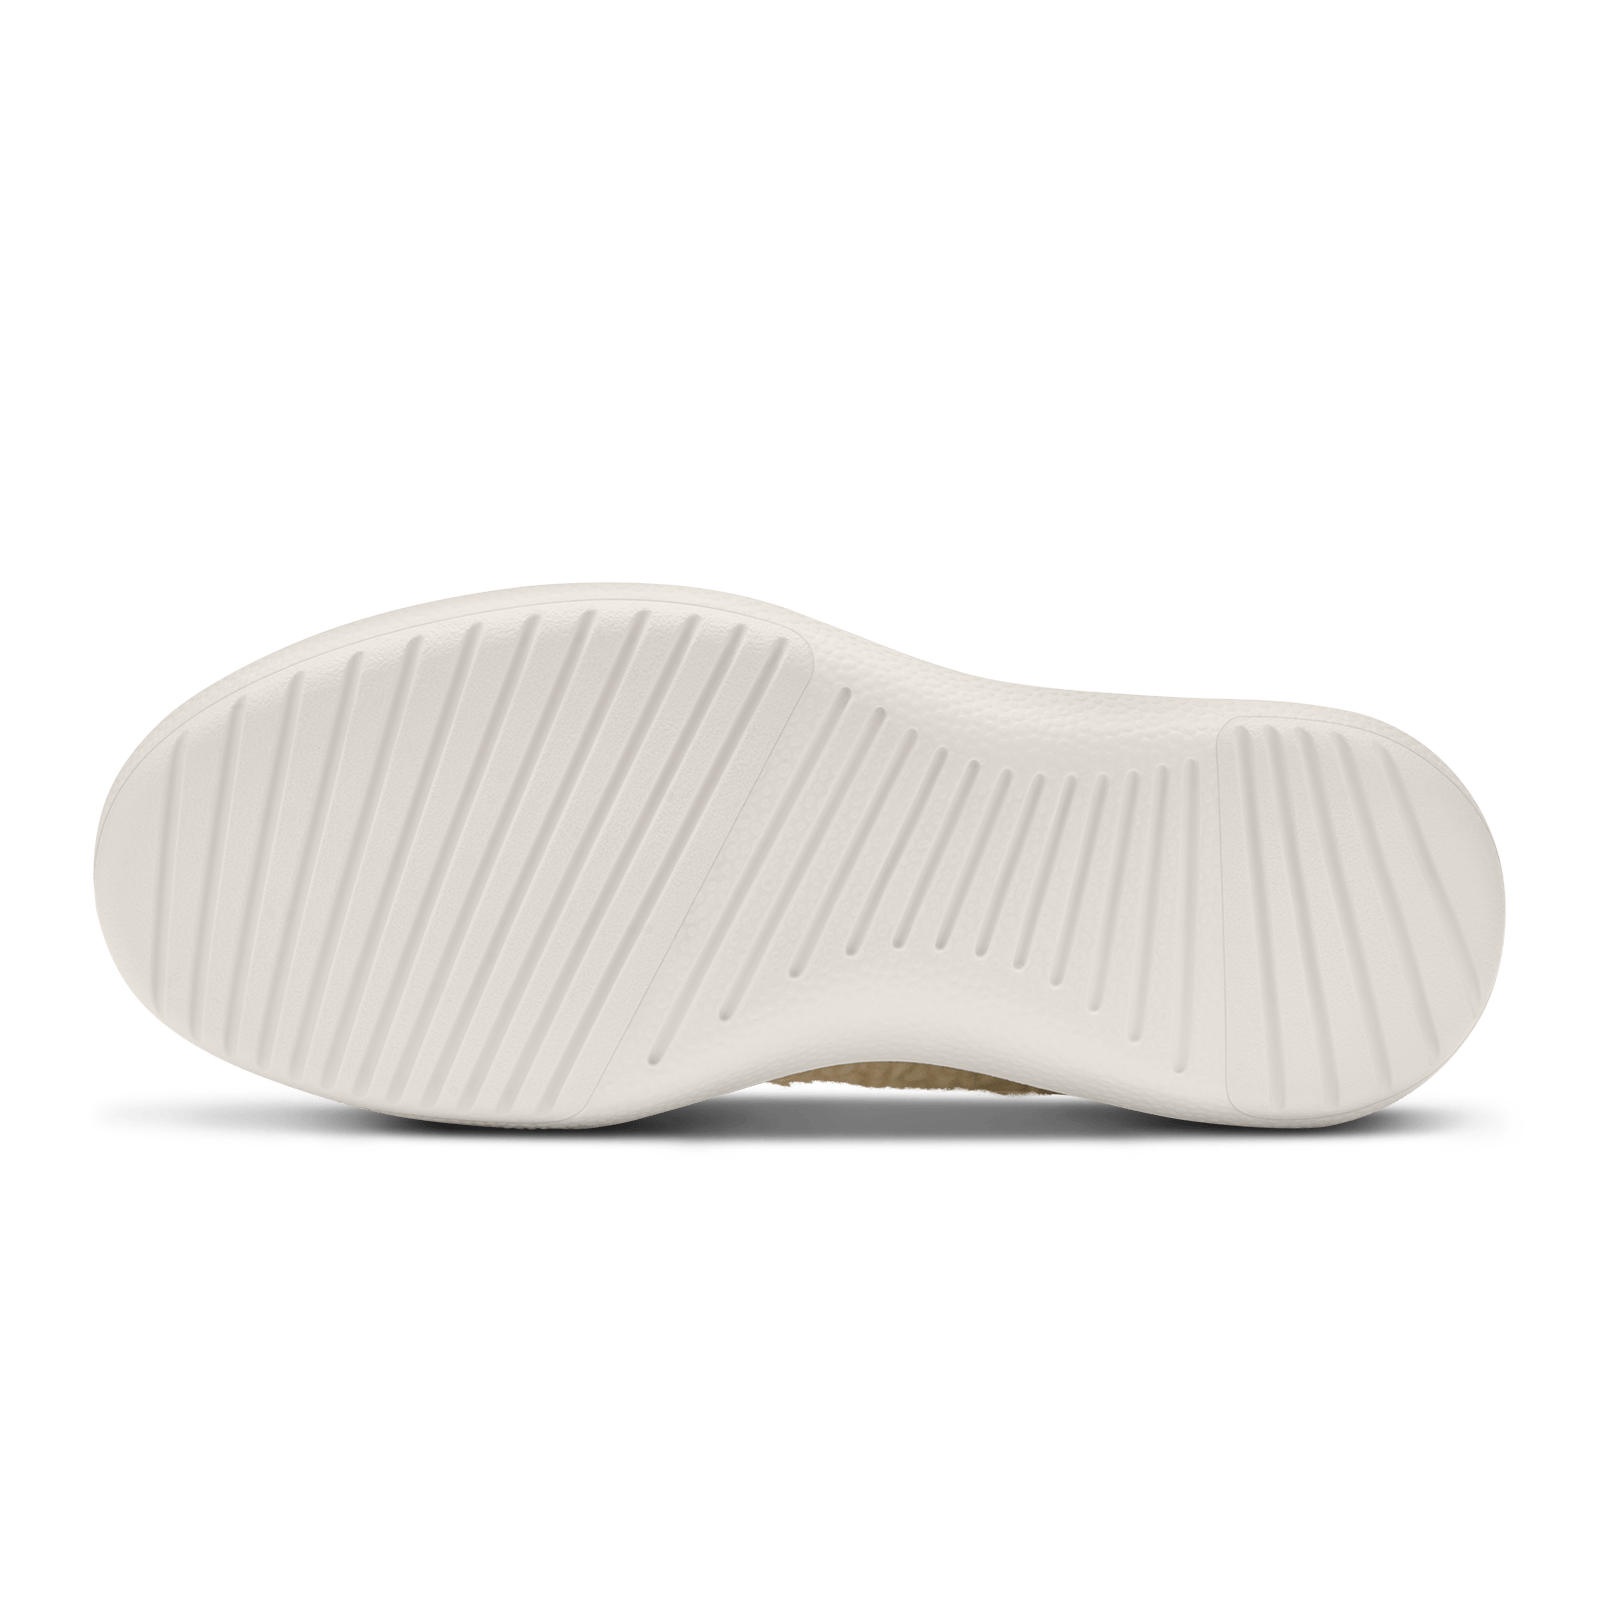 Men's Wool Runner-up Fluffs - Natural White (Natural White Sole)